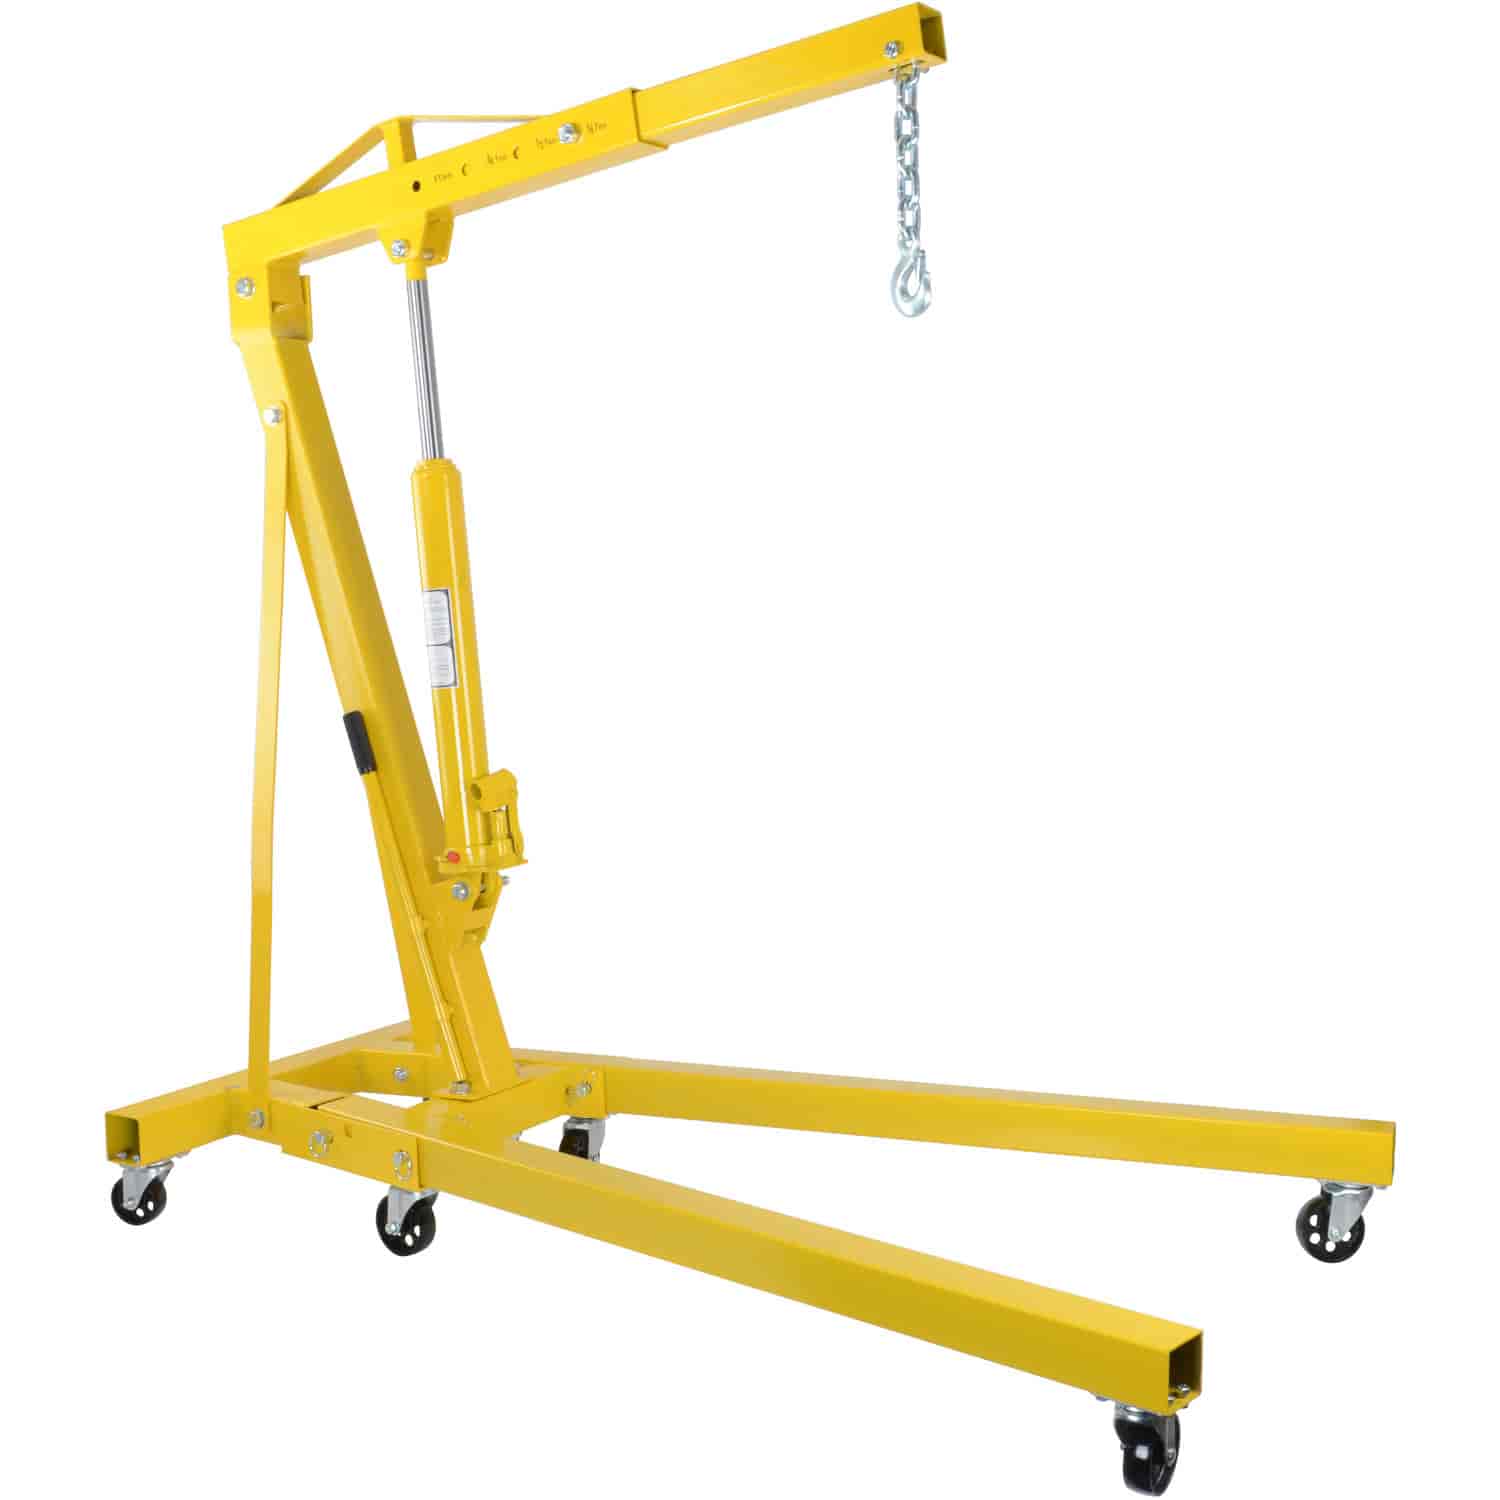 1-Ton Automotive Shop Crane [Boom Operating Range: 34 in. to 45 in.]